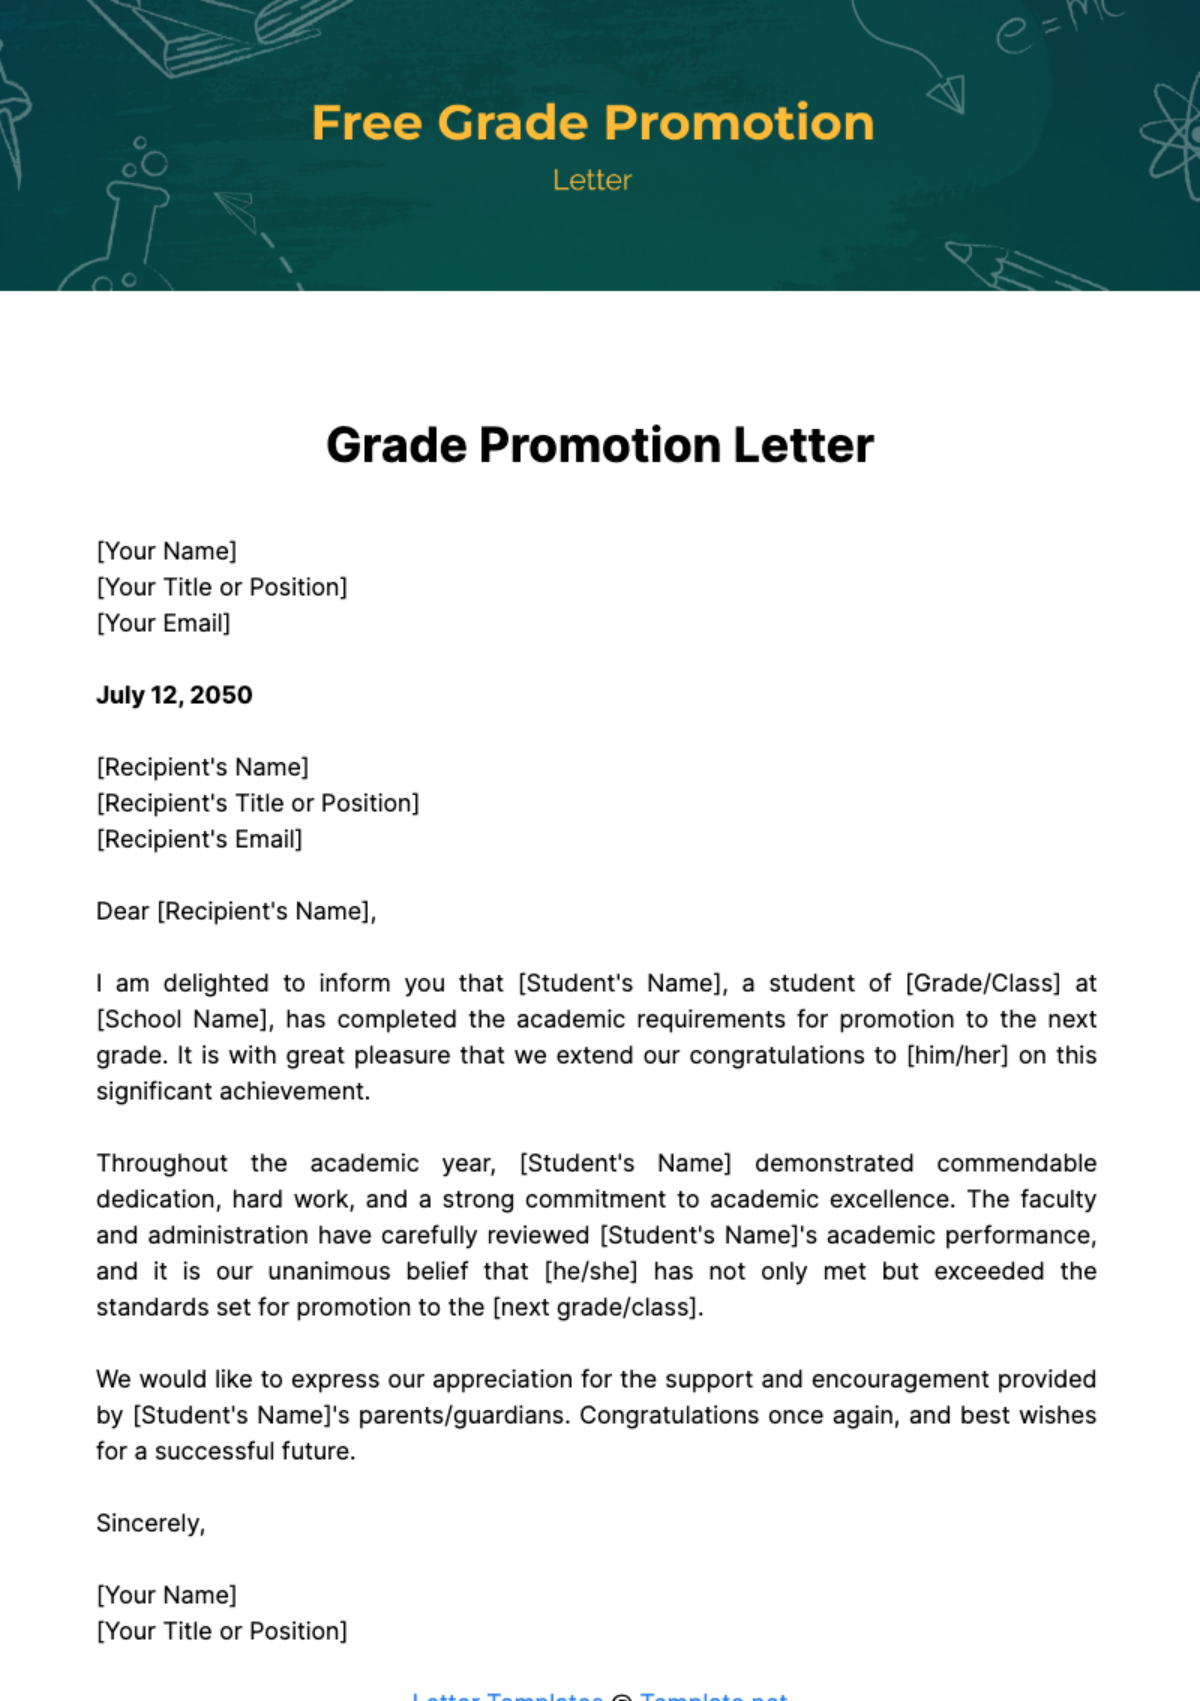 Free Grade Promotion Letter Template